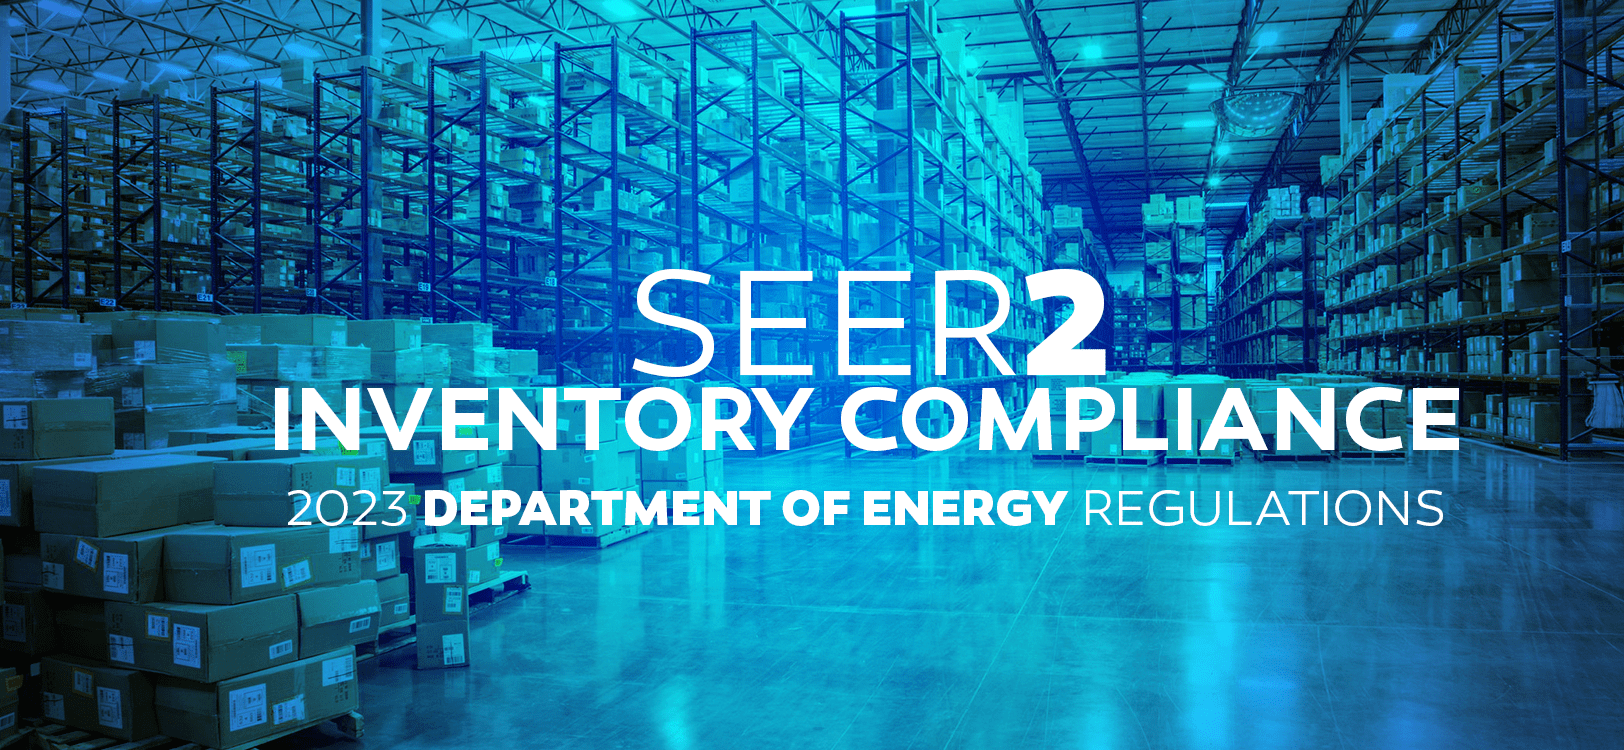 seer2 inventory compliance